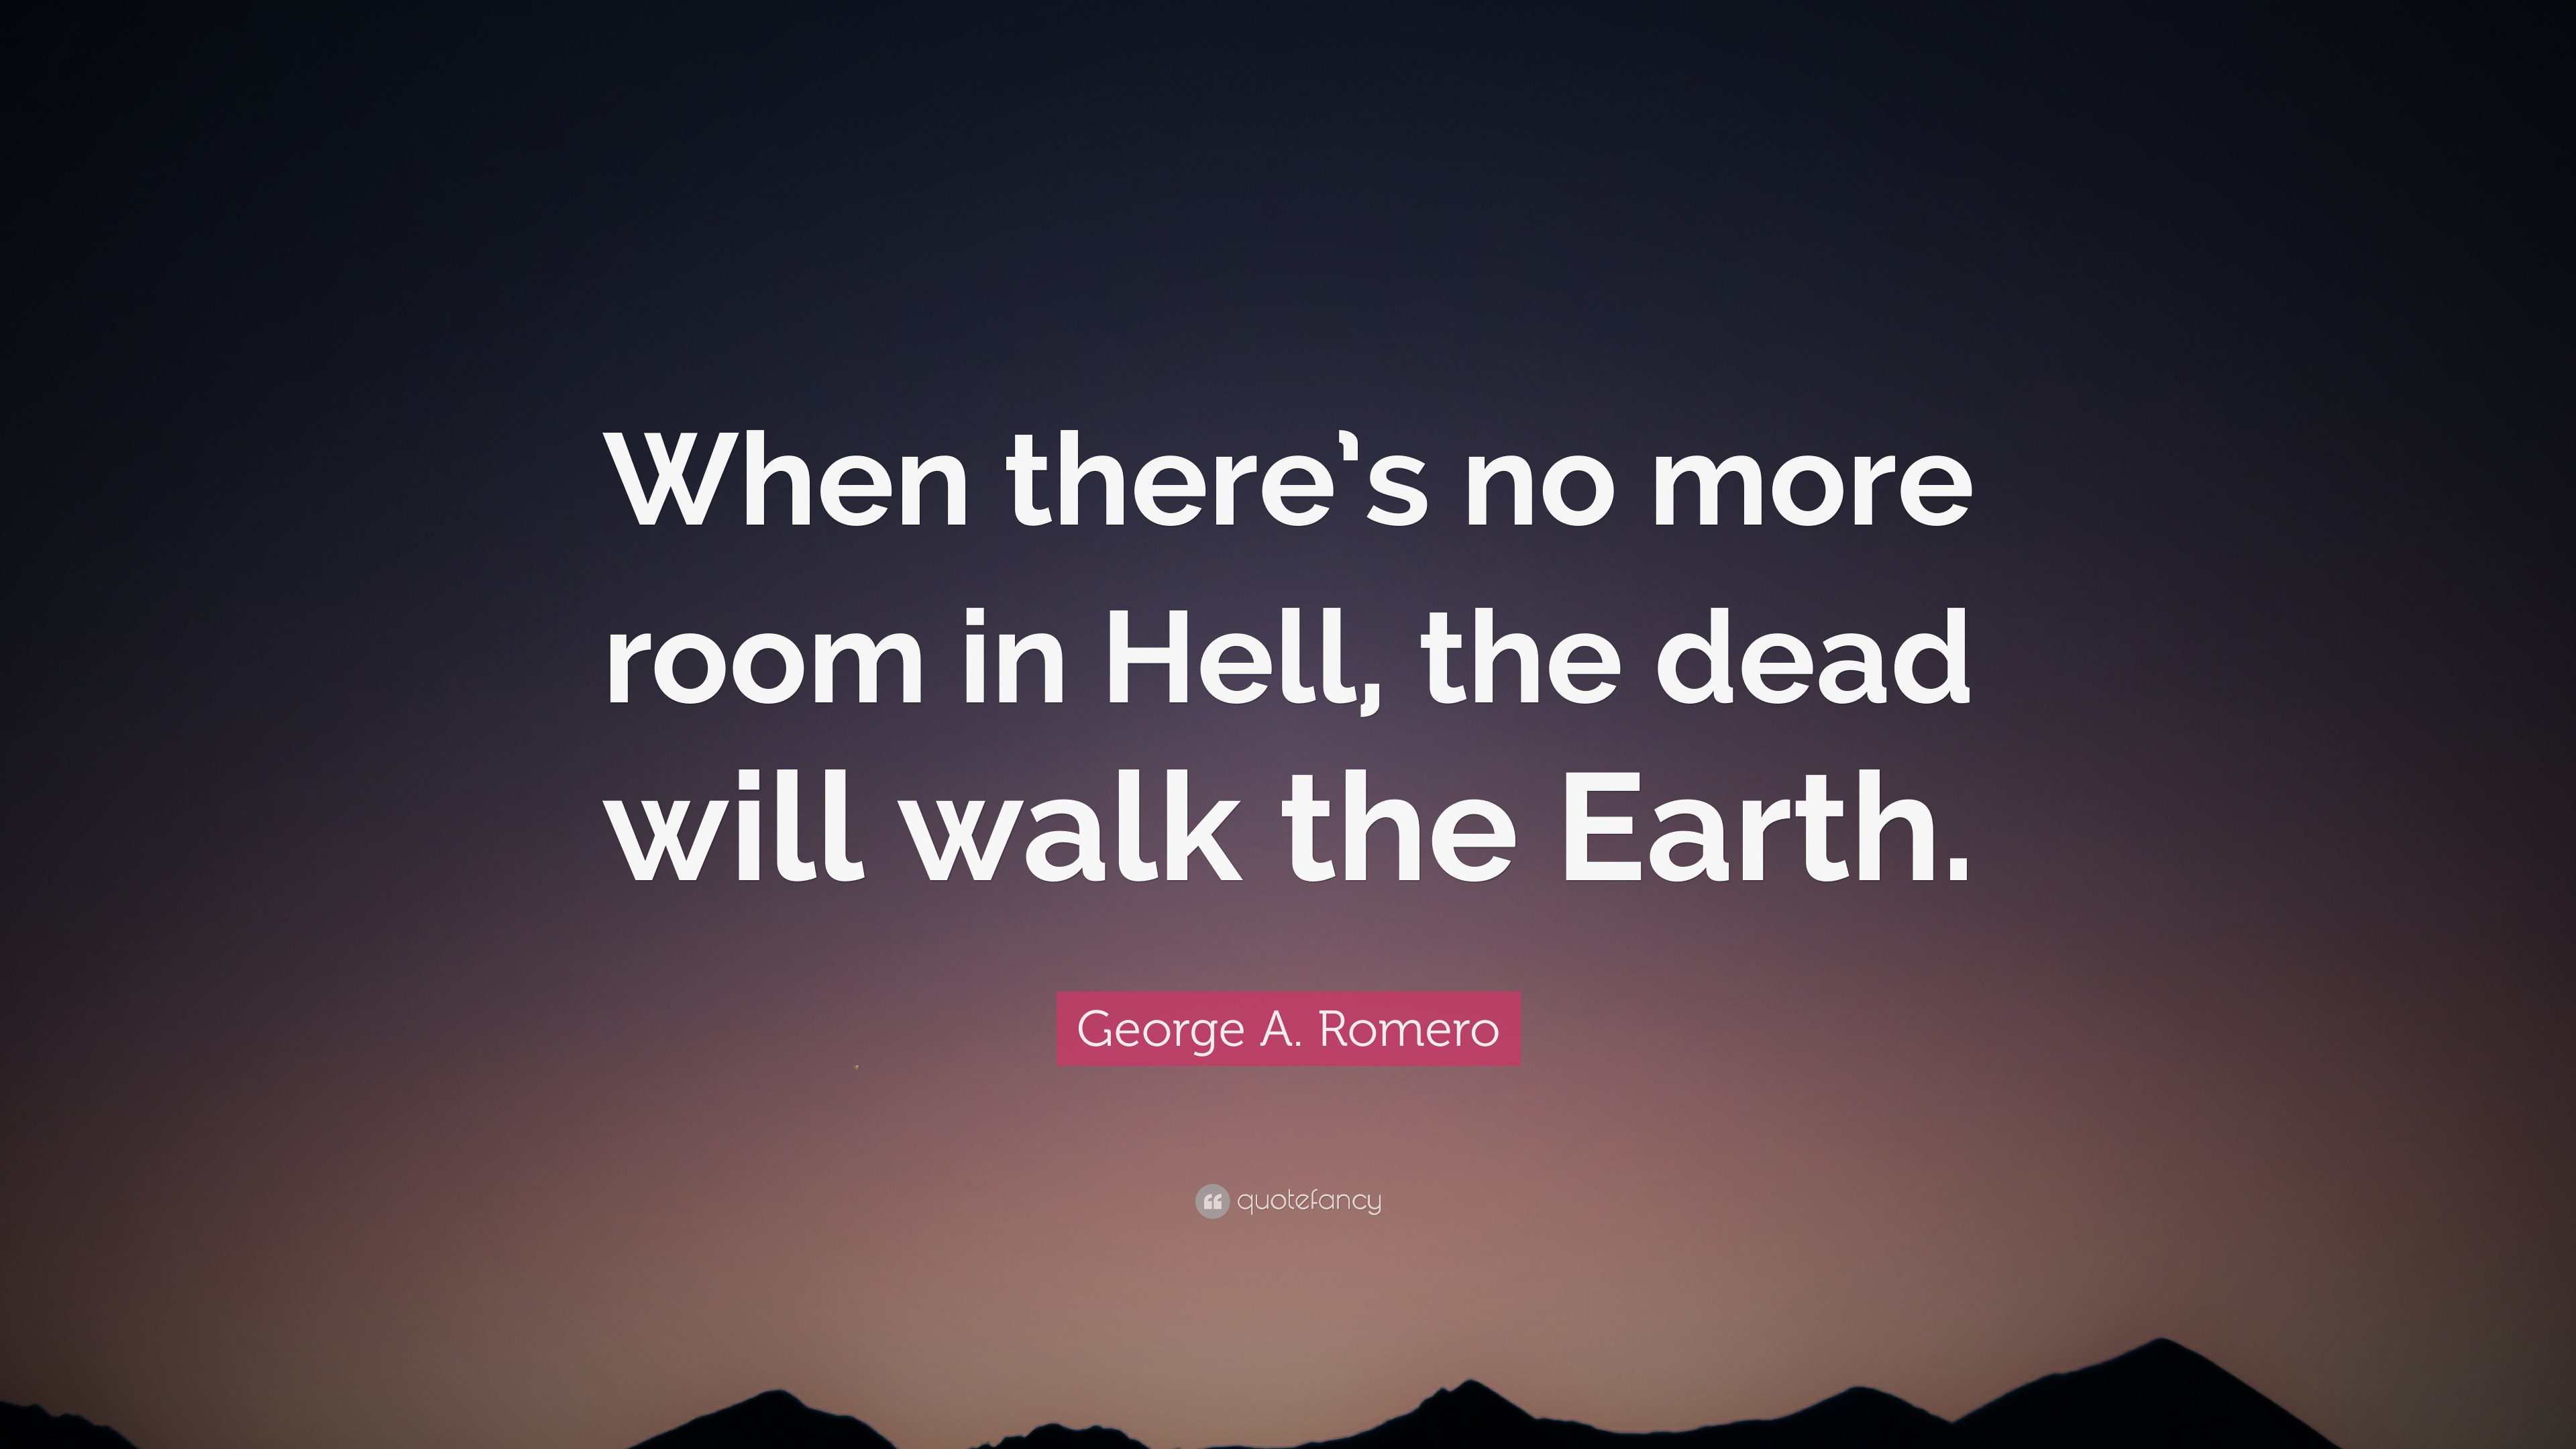 George A. Romero Quote: “When there’s no more room in Hell, the dead